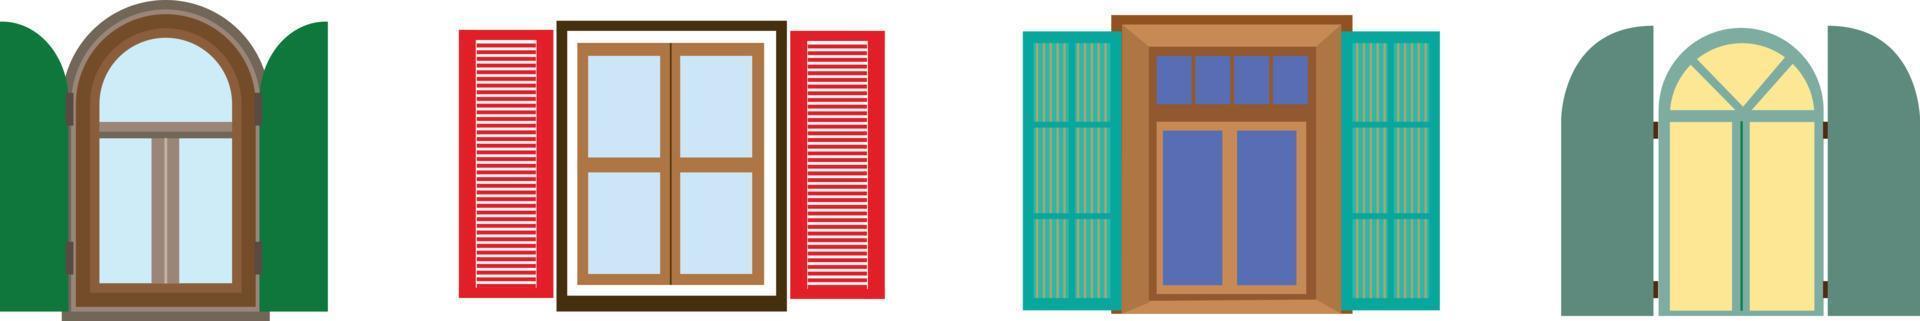 Set of detailed various colorful windows with windowsills, curtains, flowers, balconies. Flat style vector illustration EPS